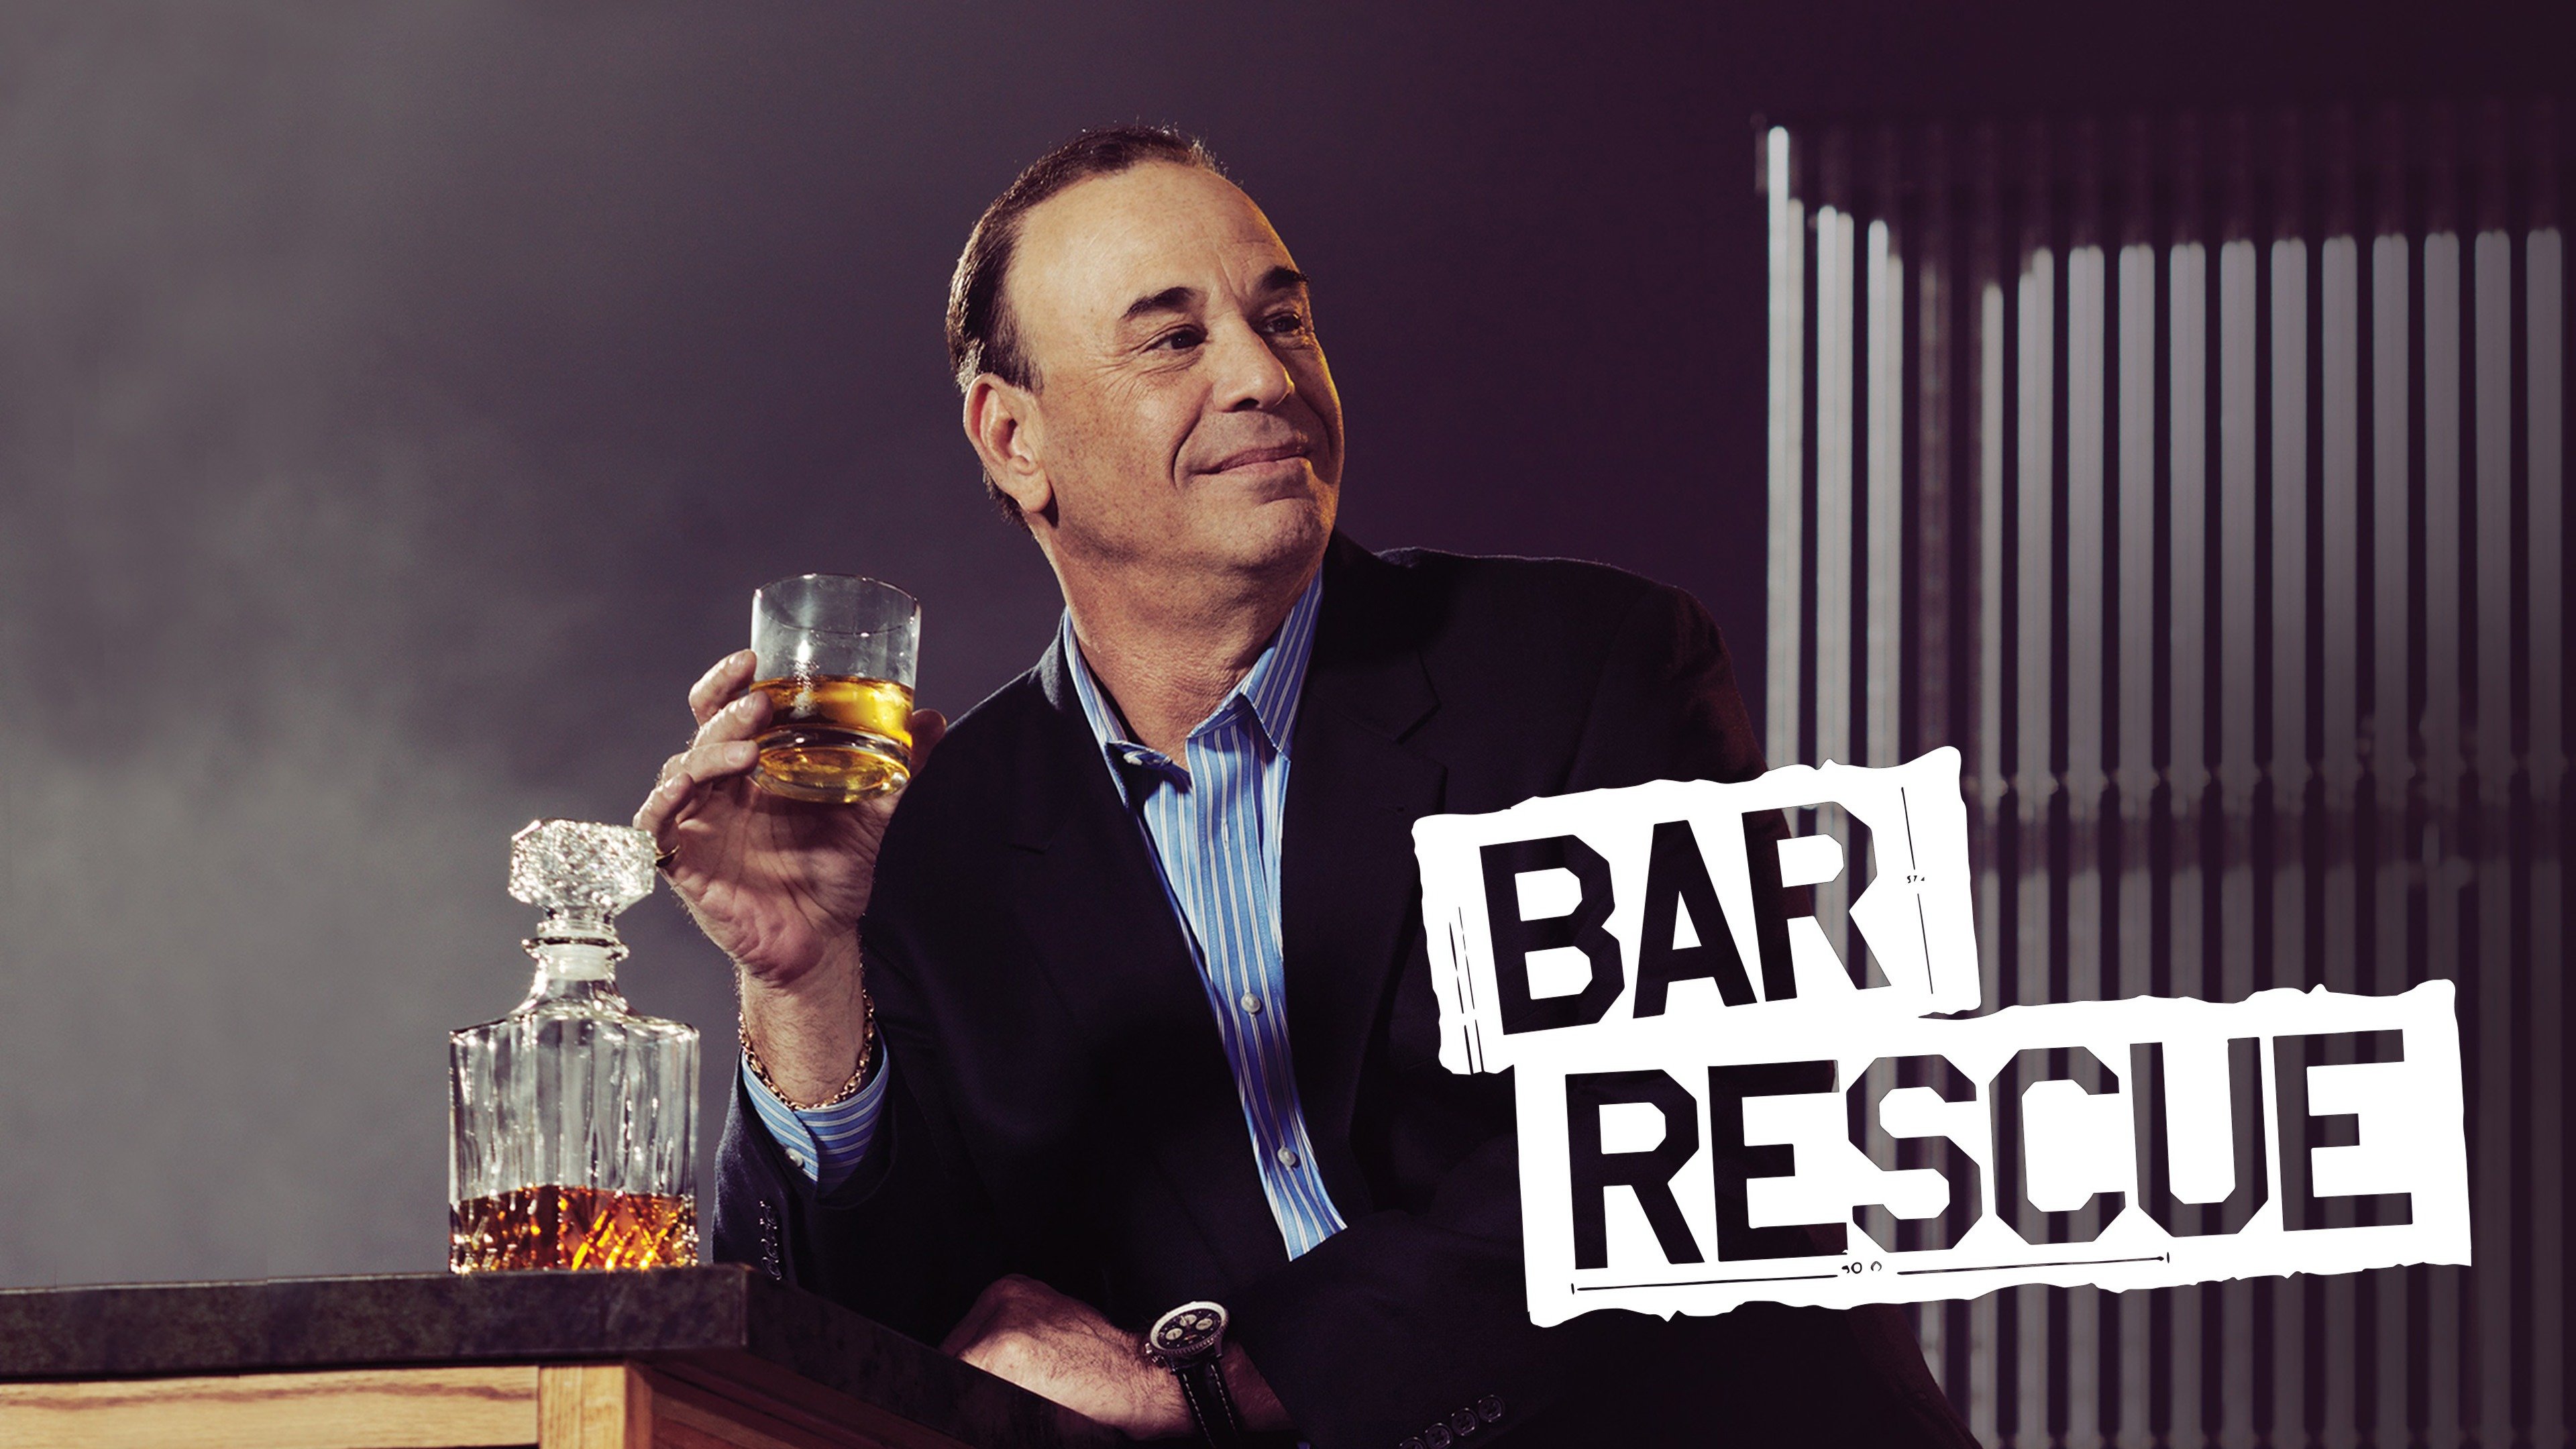 andy landreth recommends the lister bar rescue pic